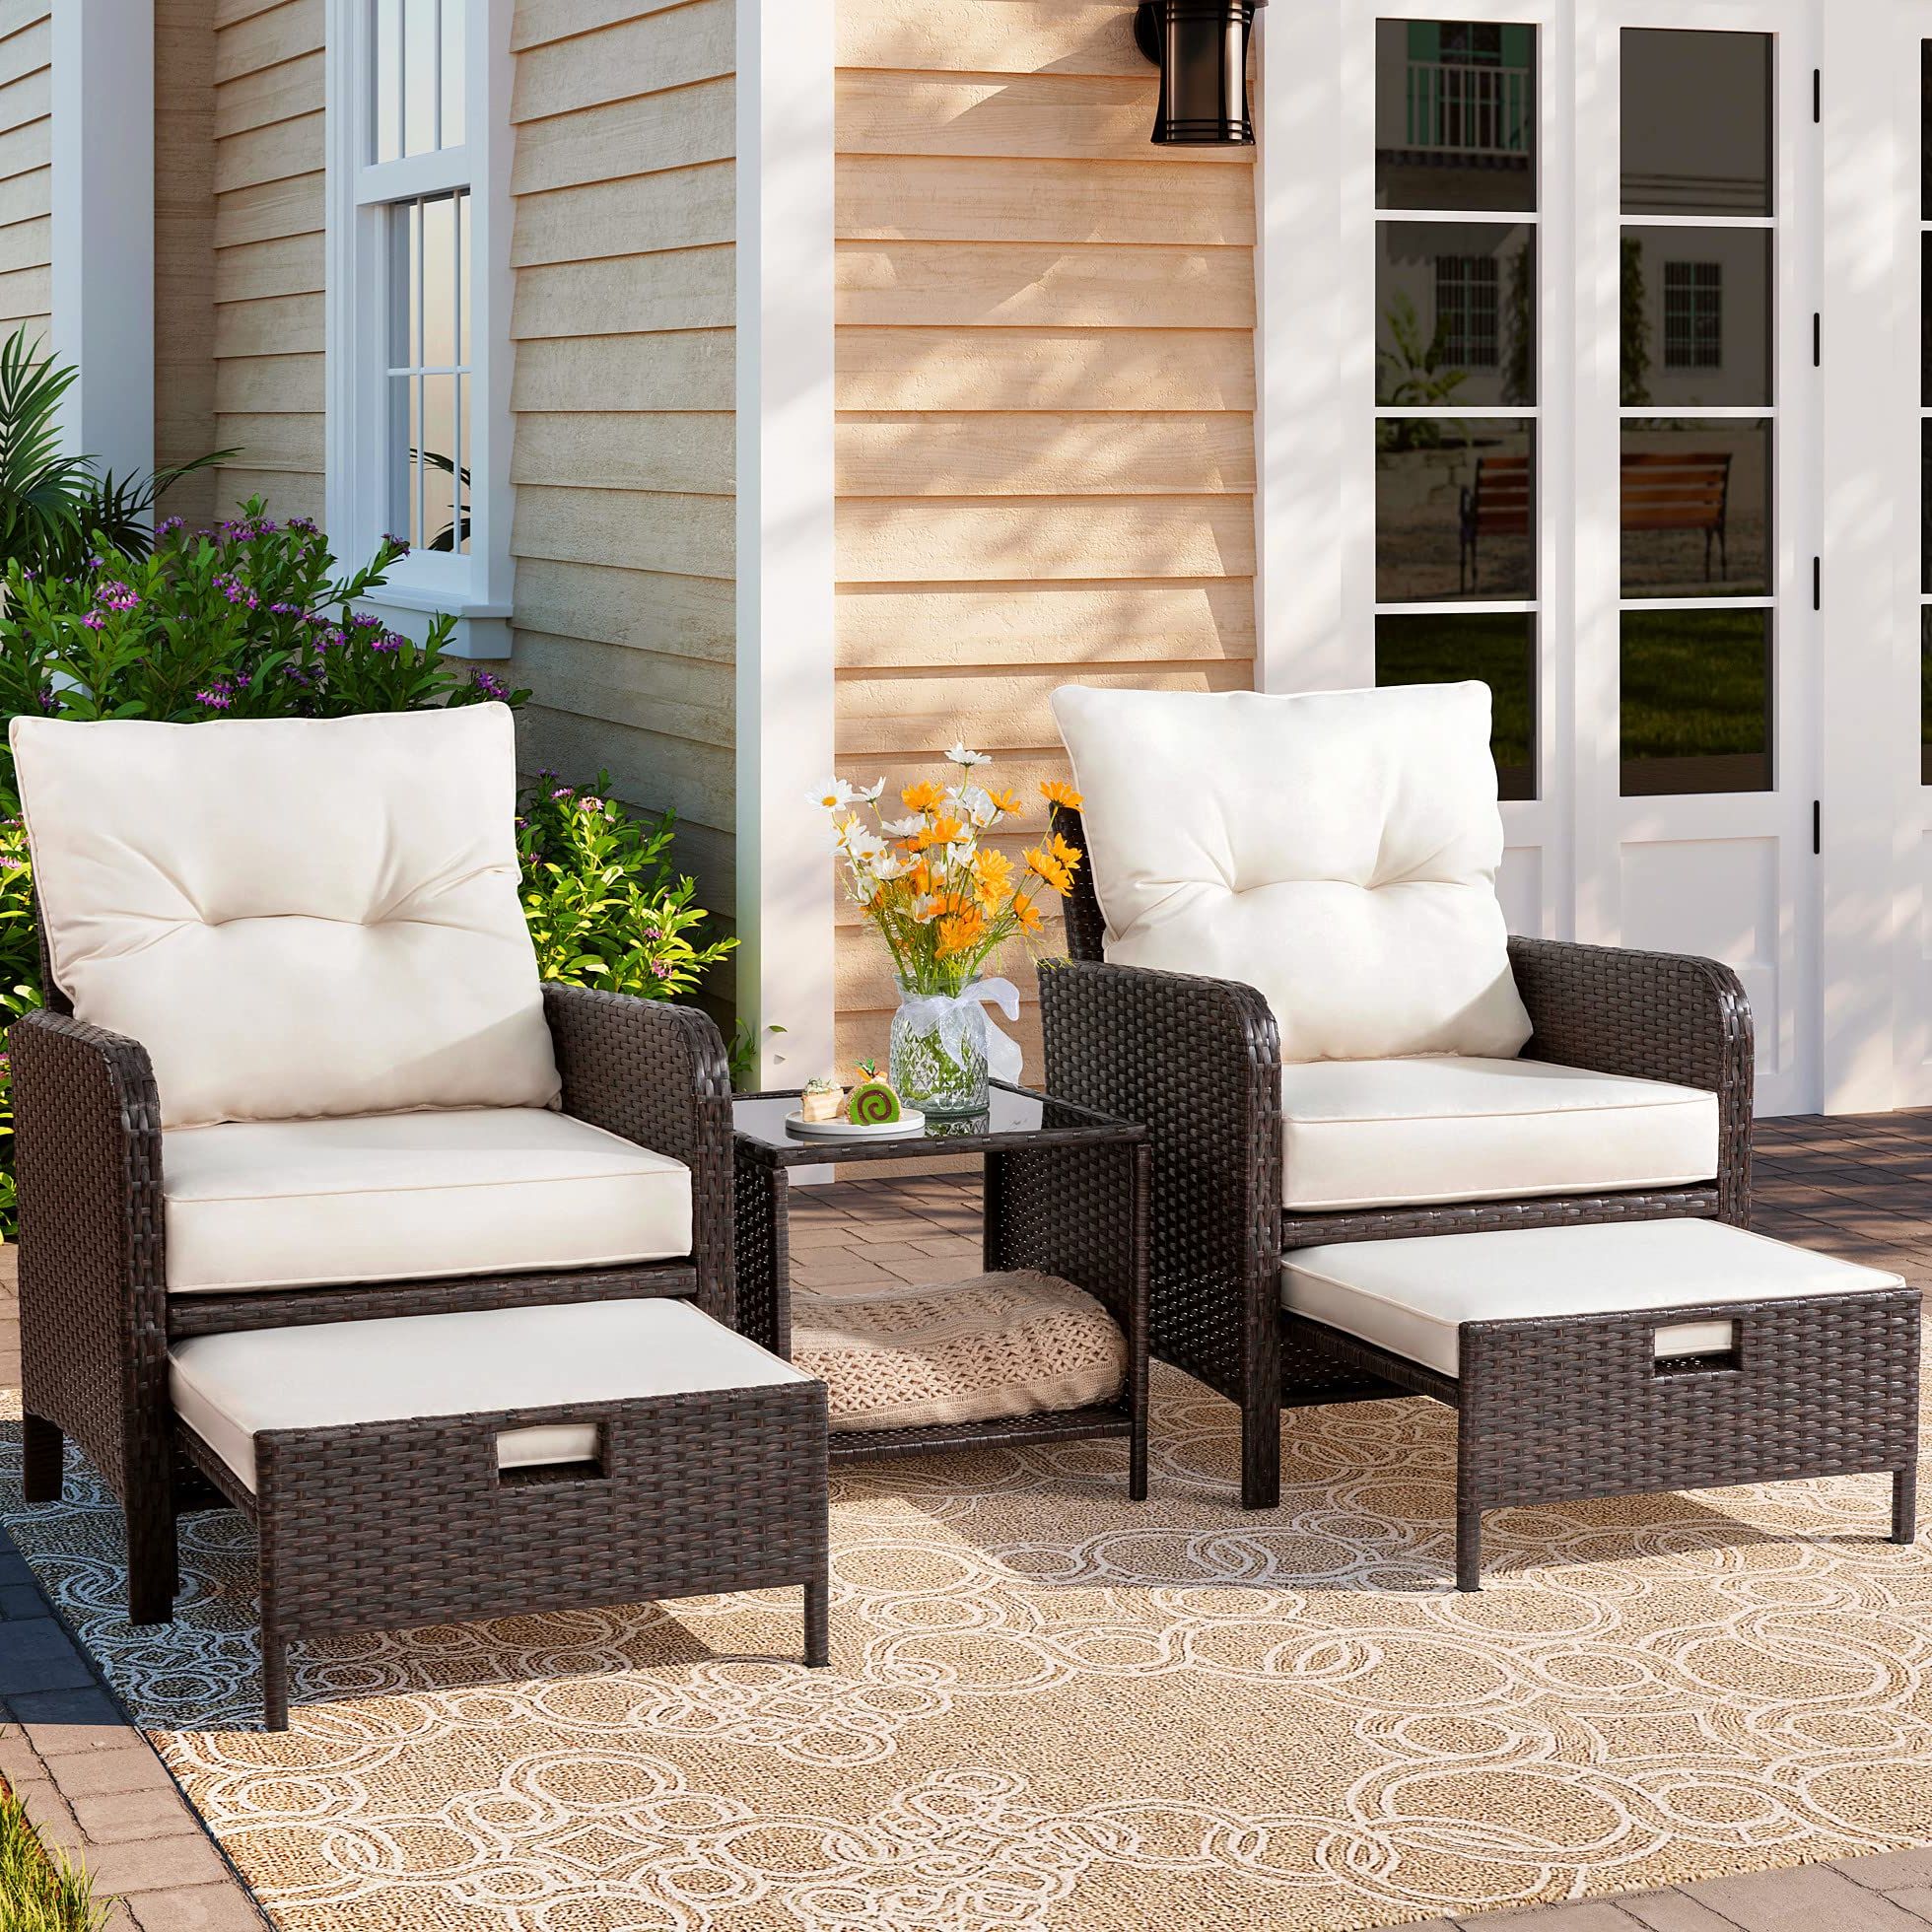 5 Piece Patio Furniture Set Regarding Newest Amazon: Vongrasig 5 Piece Wicker Patio Furniture Set, All Weather Pe  Wicker Rattan Outdoor Chair And Ottoman Set, Small Cushioned Patio Chairs  With Ottoman Underneath For Lawn Garden Backyard (beige) : Patio, (View 5 of 15)